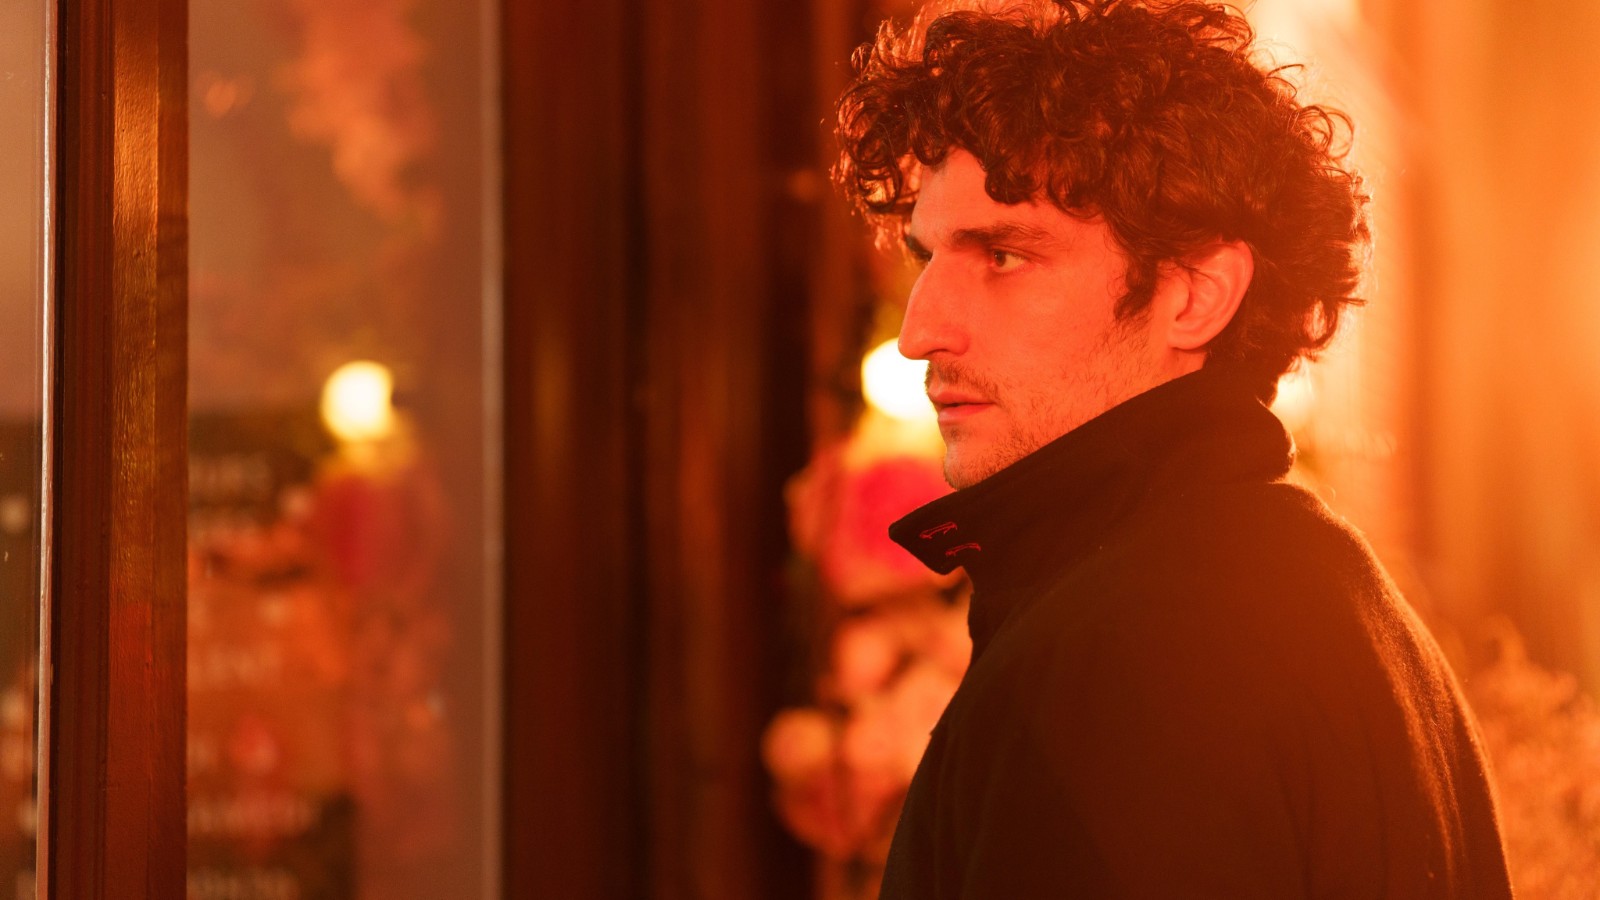 Louis Garrel on The Innocent, Making the Audience Happy, and How to Be a Good Cinephile